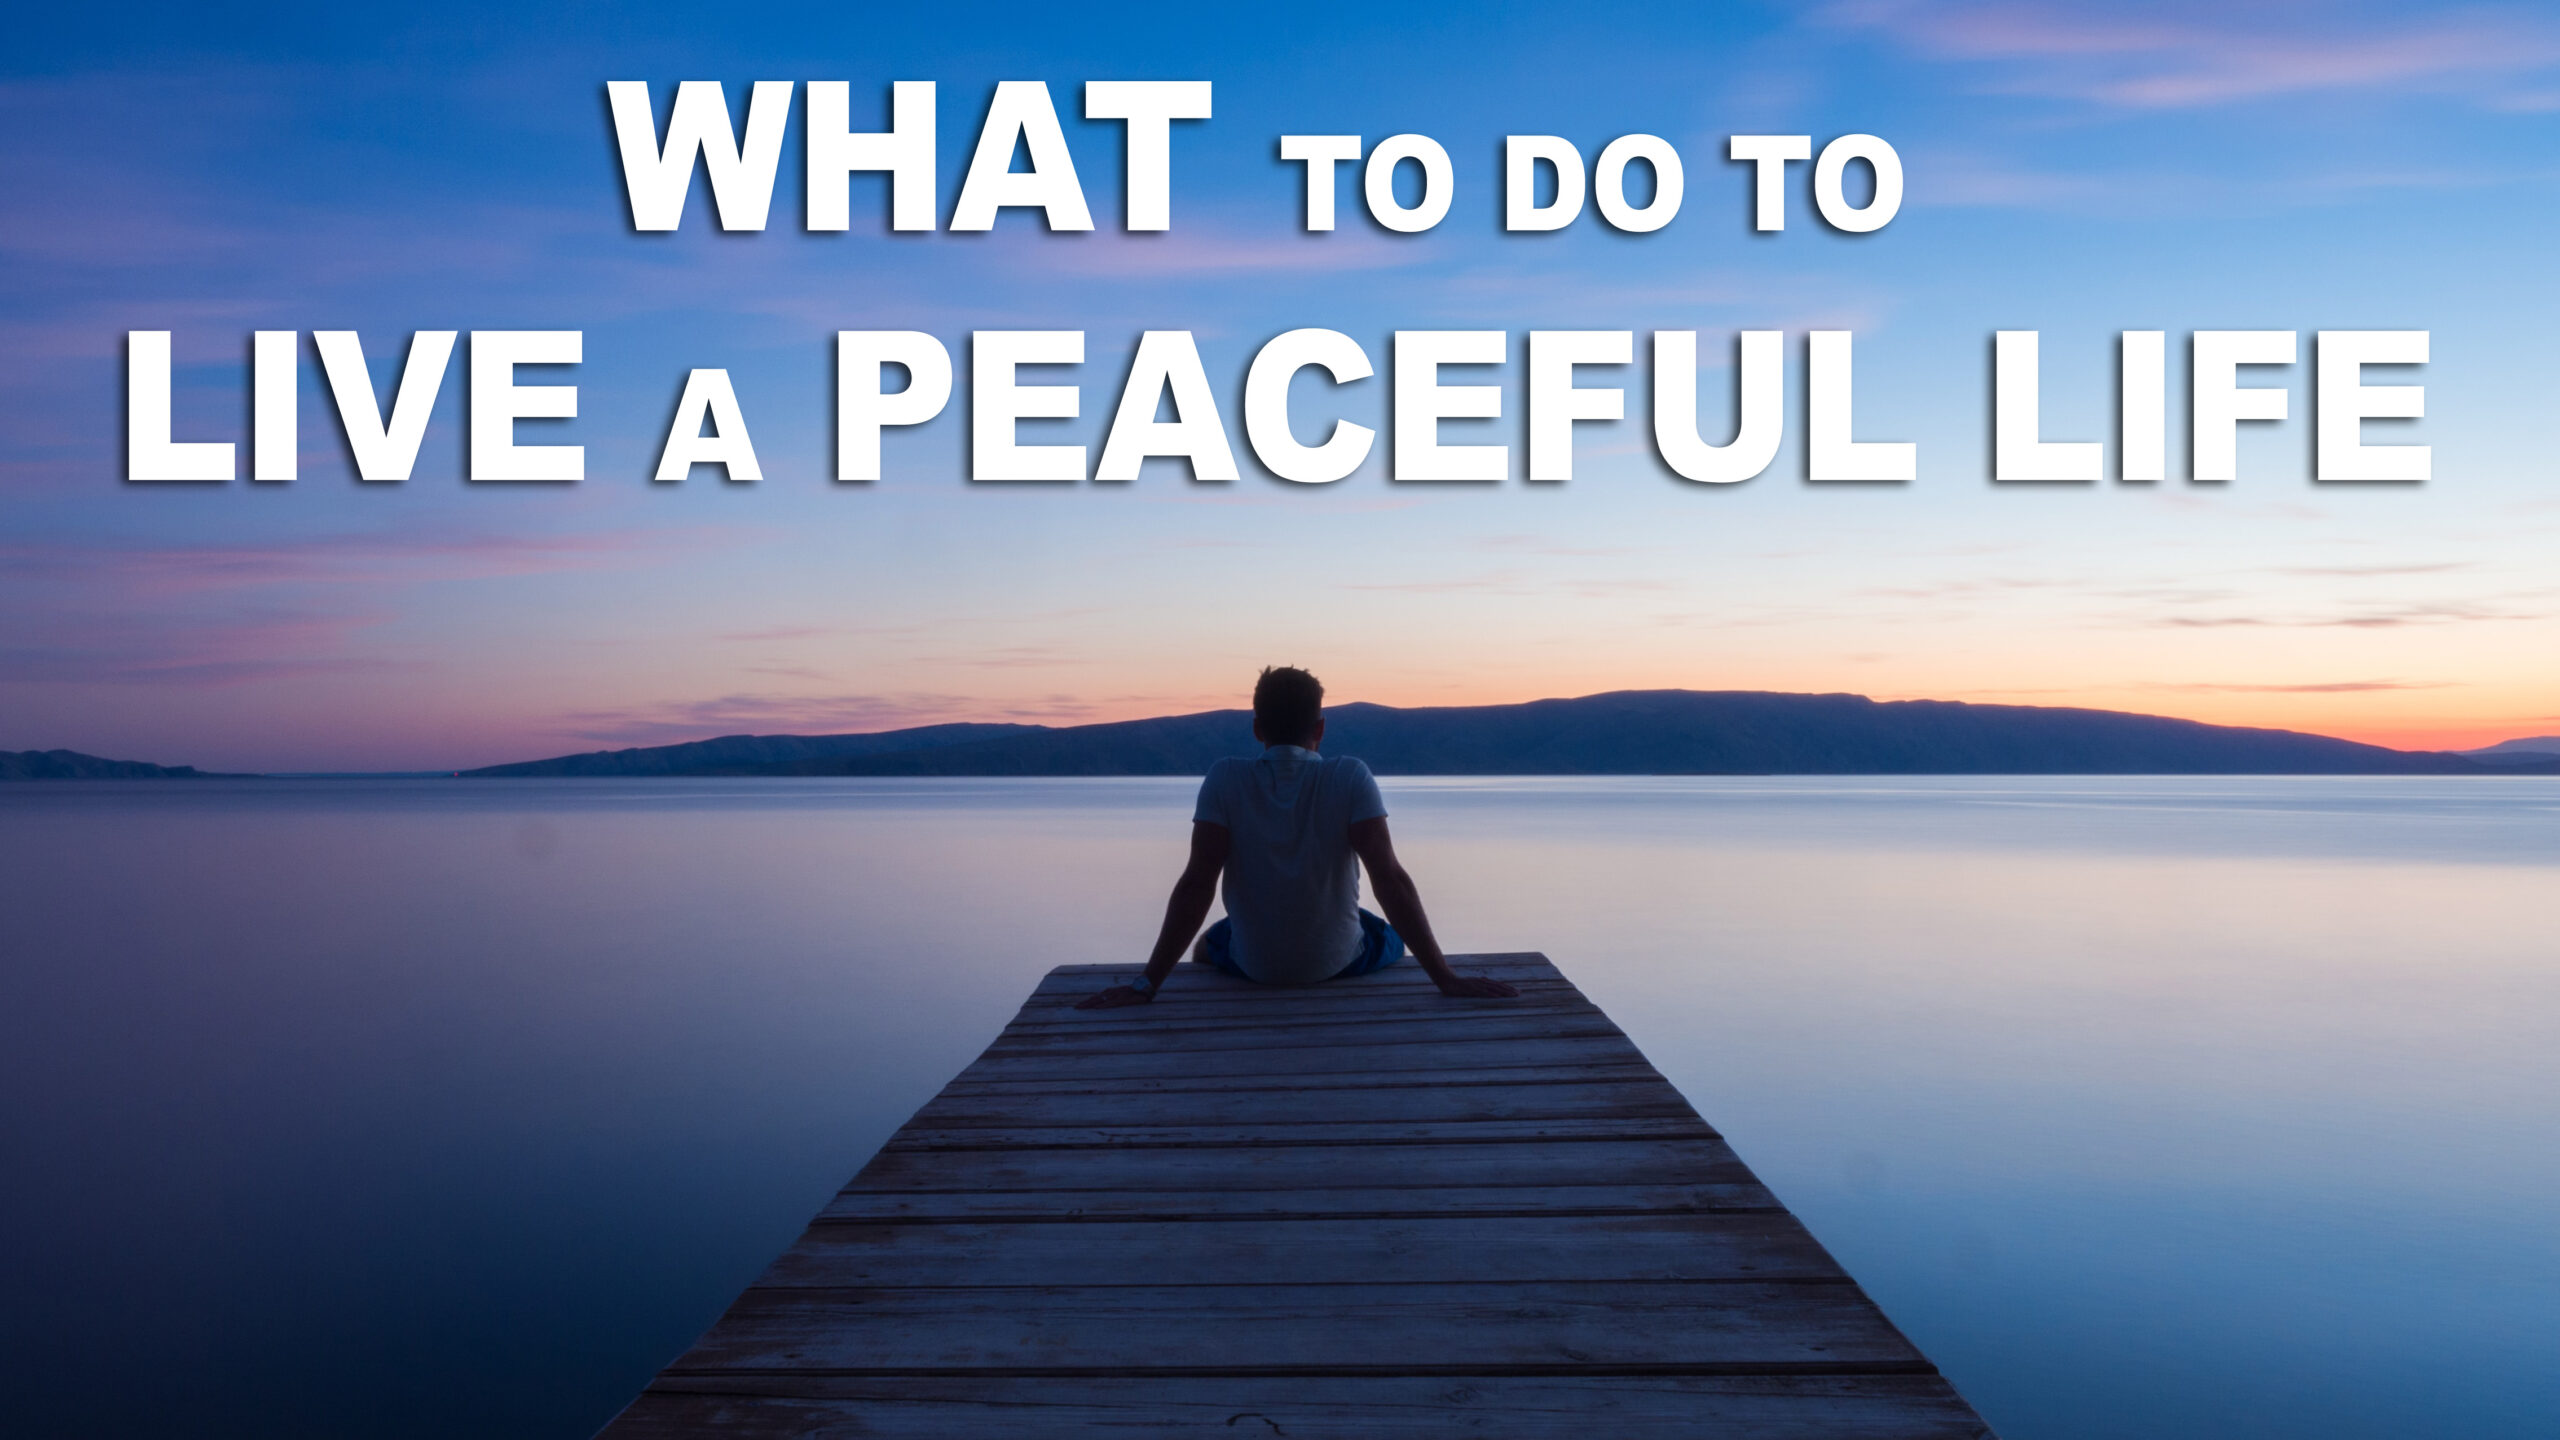 What to do to live a peaceful life